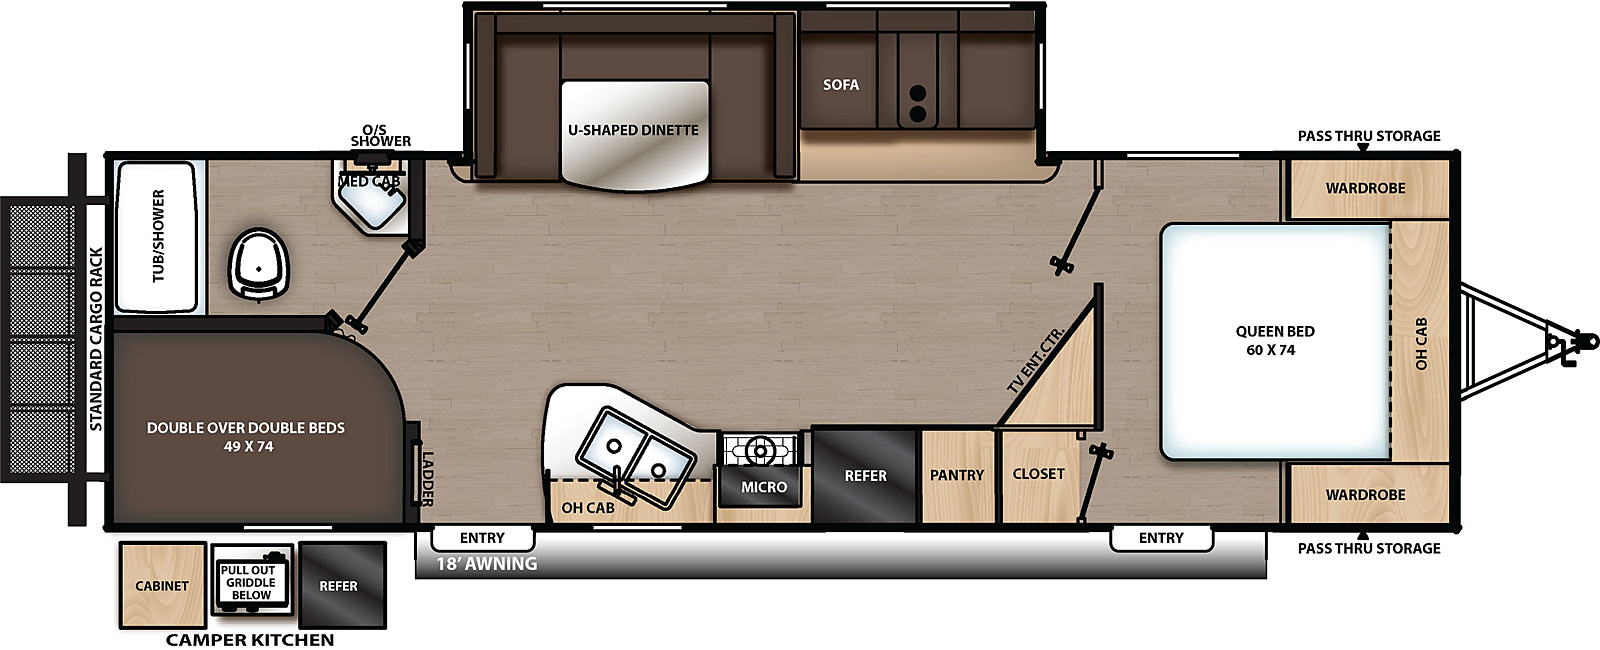 The 263BHSCK has one slide out on the off-door side and two entry doors on the door side. Interior layout from front to back: front bedroom with entry door, foot facing queen bed, overhead cabinet, wardrobes on either side of the bed, and off-door side closet; entertainment center; kitchen living dining area with off-door side slide out containing sofa and u-shaped dinette; door side kitchen containing pantry, refrigerator, cook top stove, microwave cabinet, double basin sink, and overhead cabinet; off-door side bathroom; and door side double bunks.